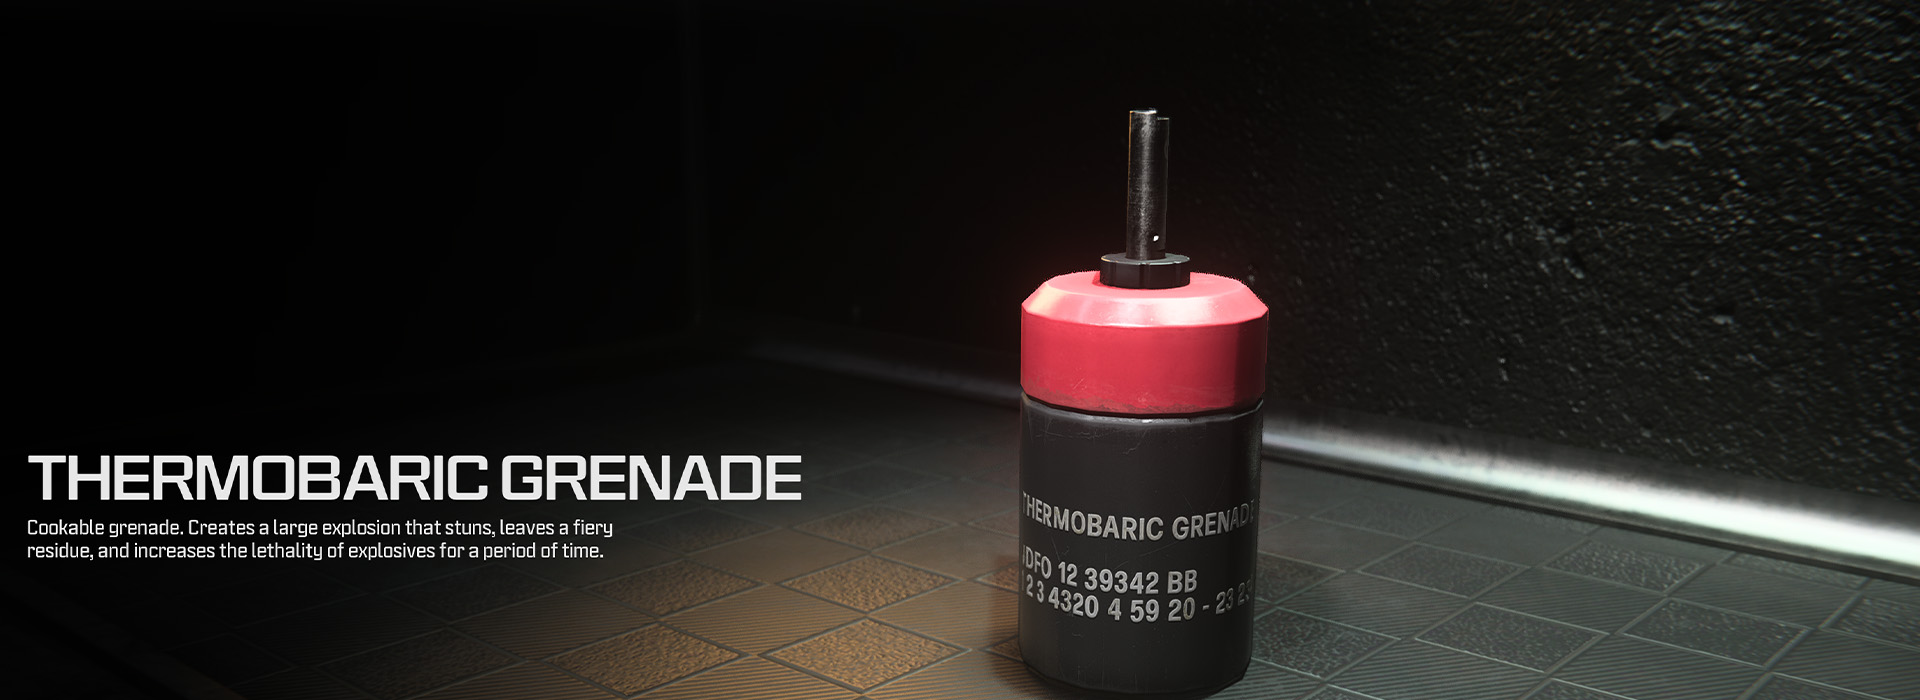 Thermobaric Grenade in Warzone